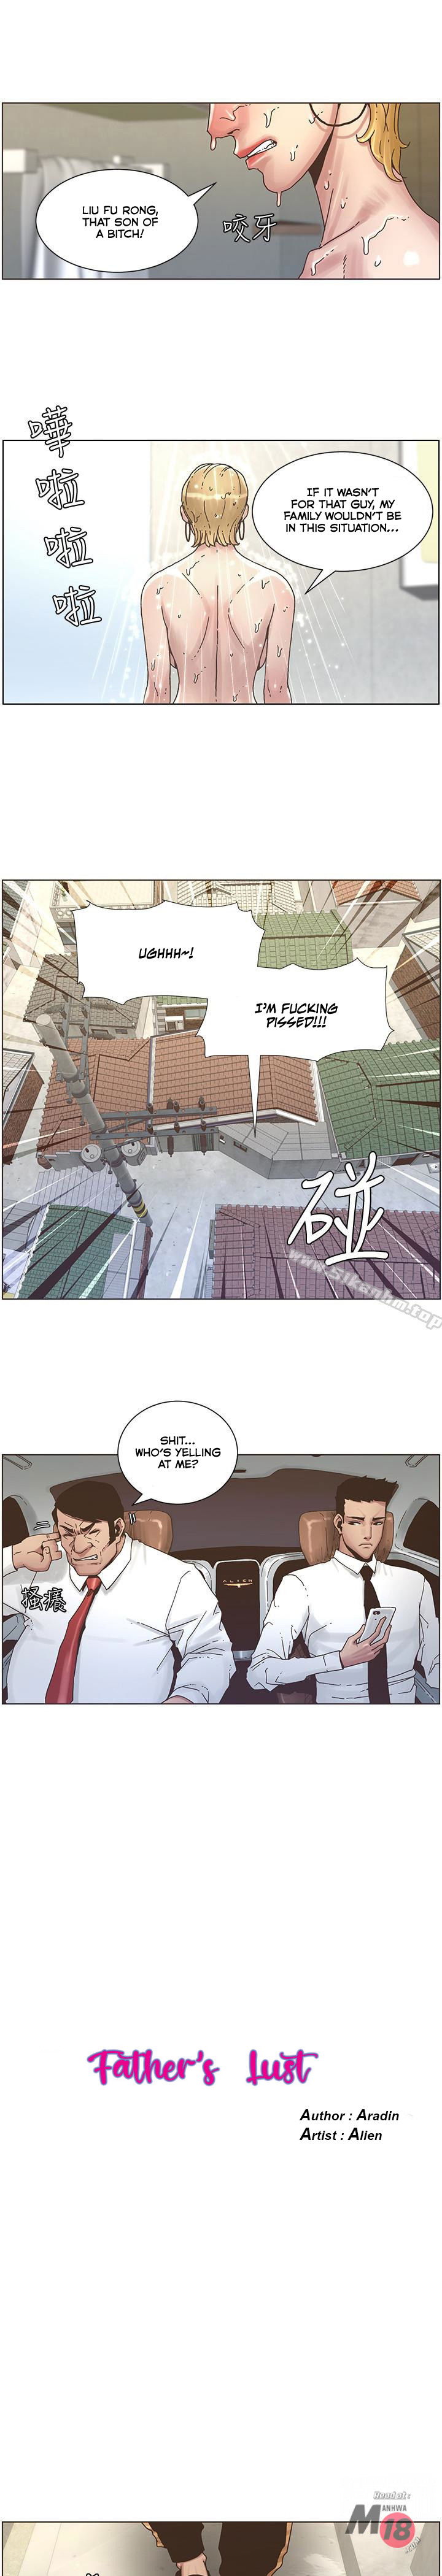 fathers-lust-chap-21-8